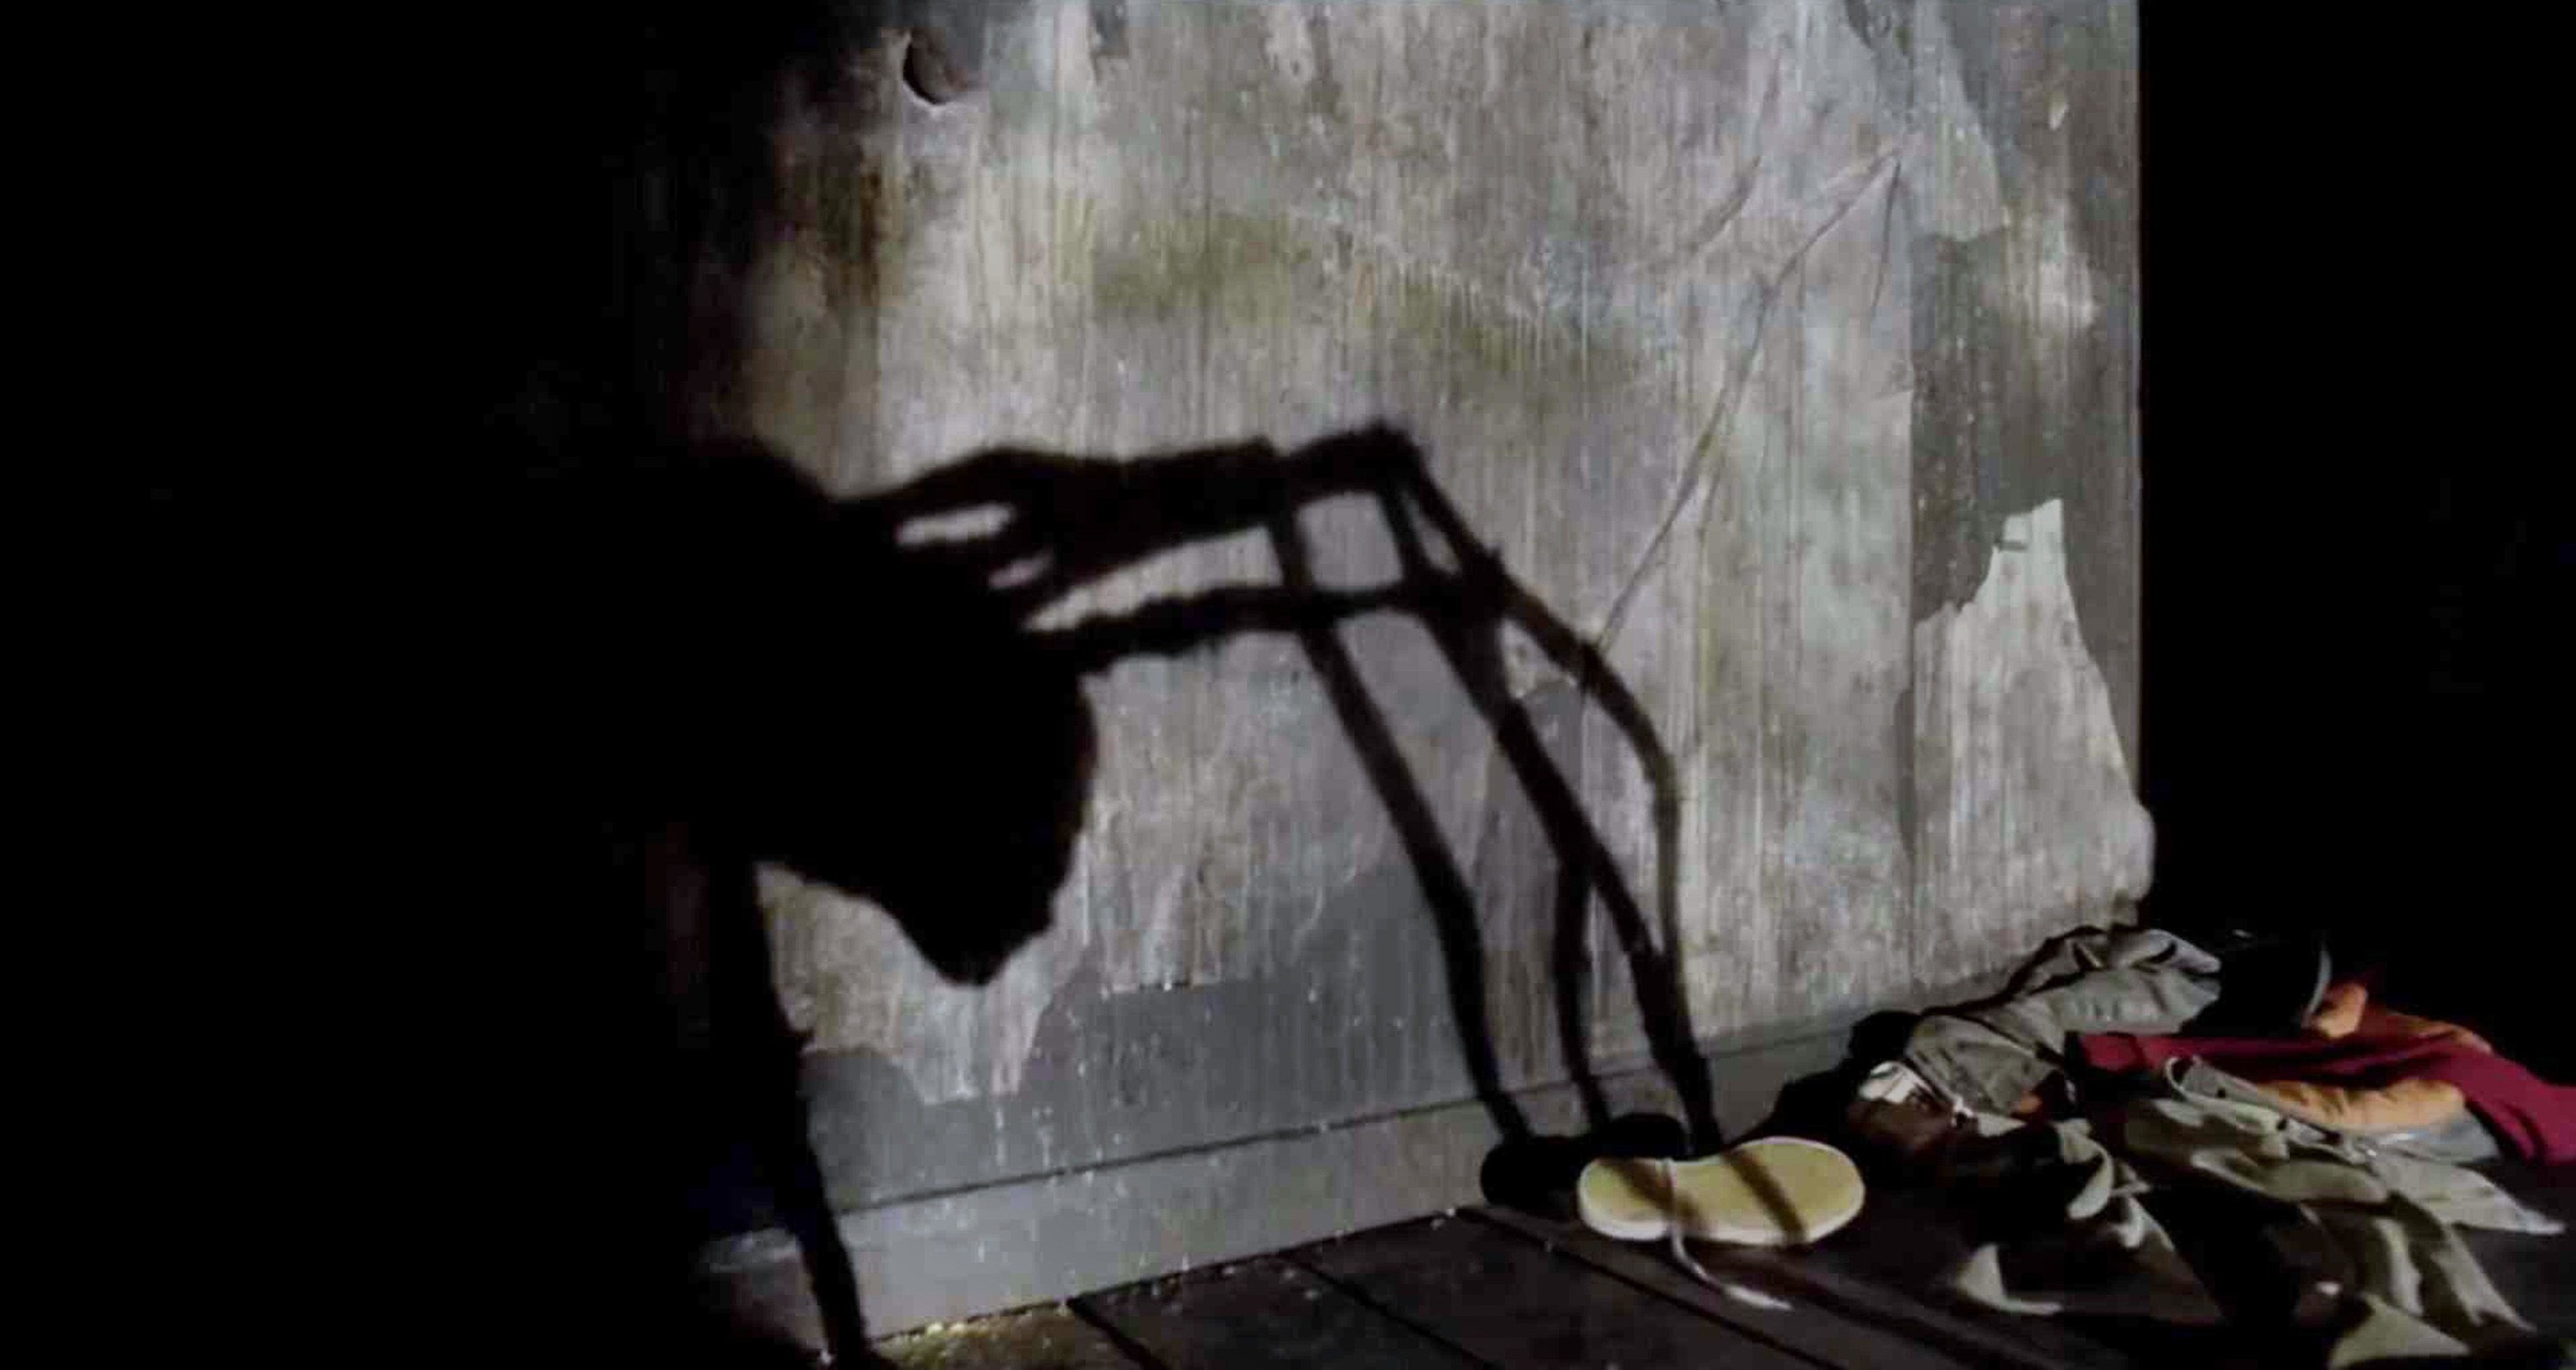 The shadow of a spider-like marionette is cast into a messy room in &quot;Possum&quot;